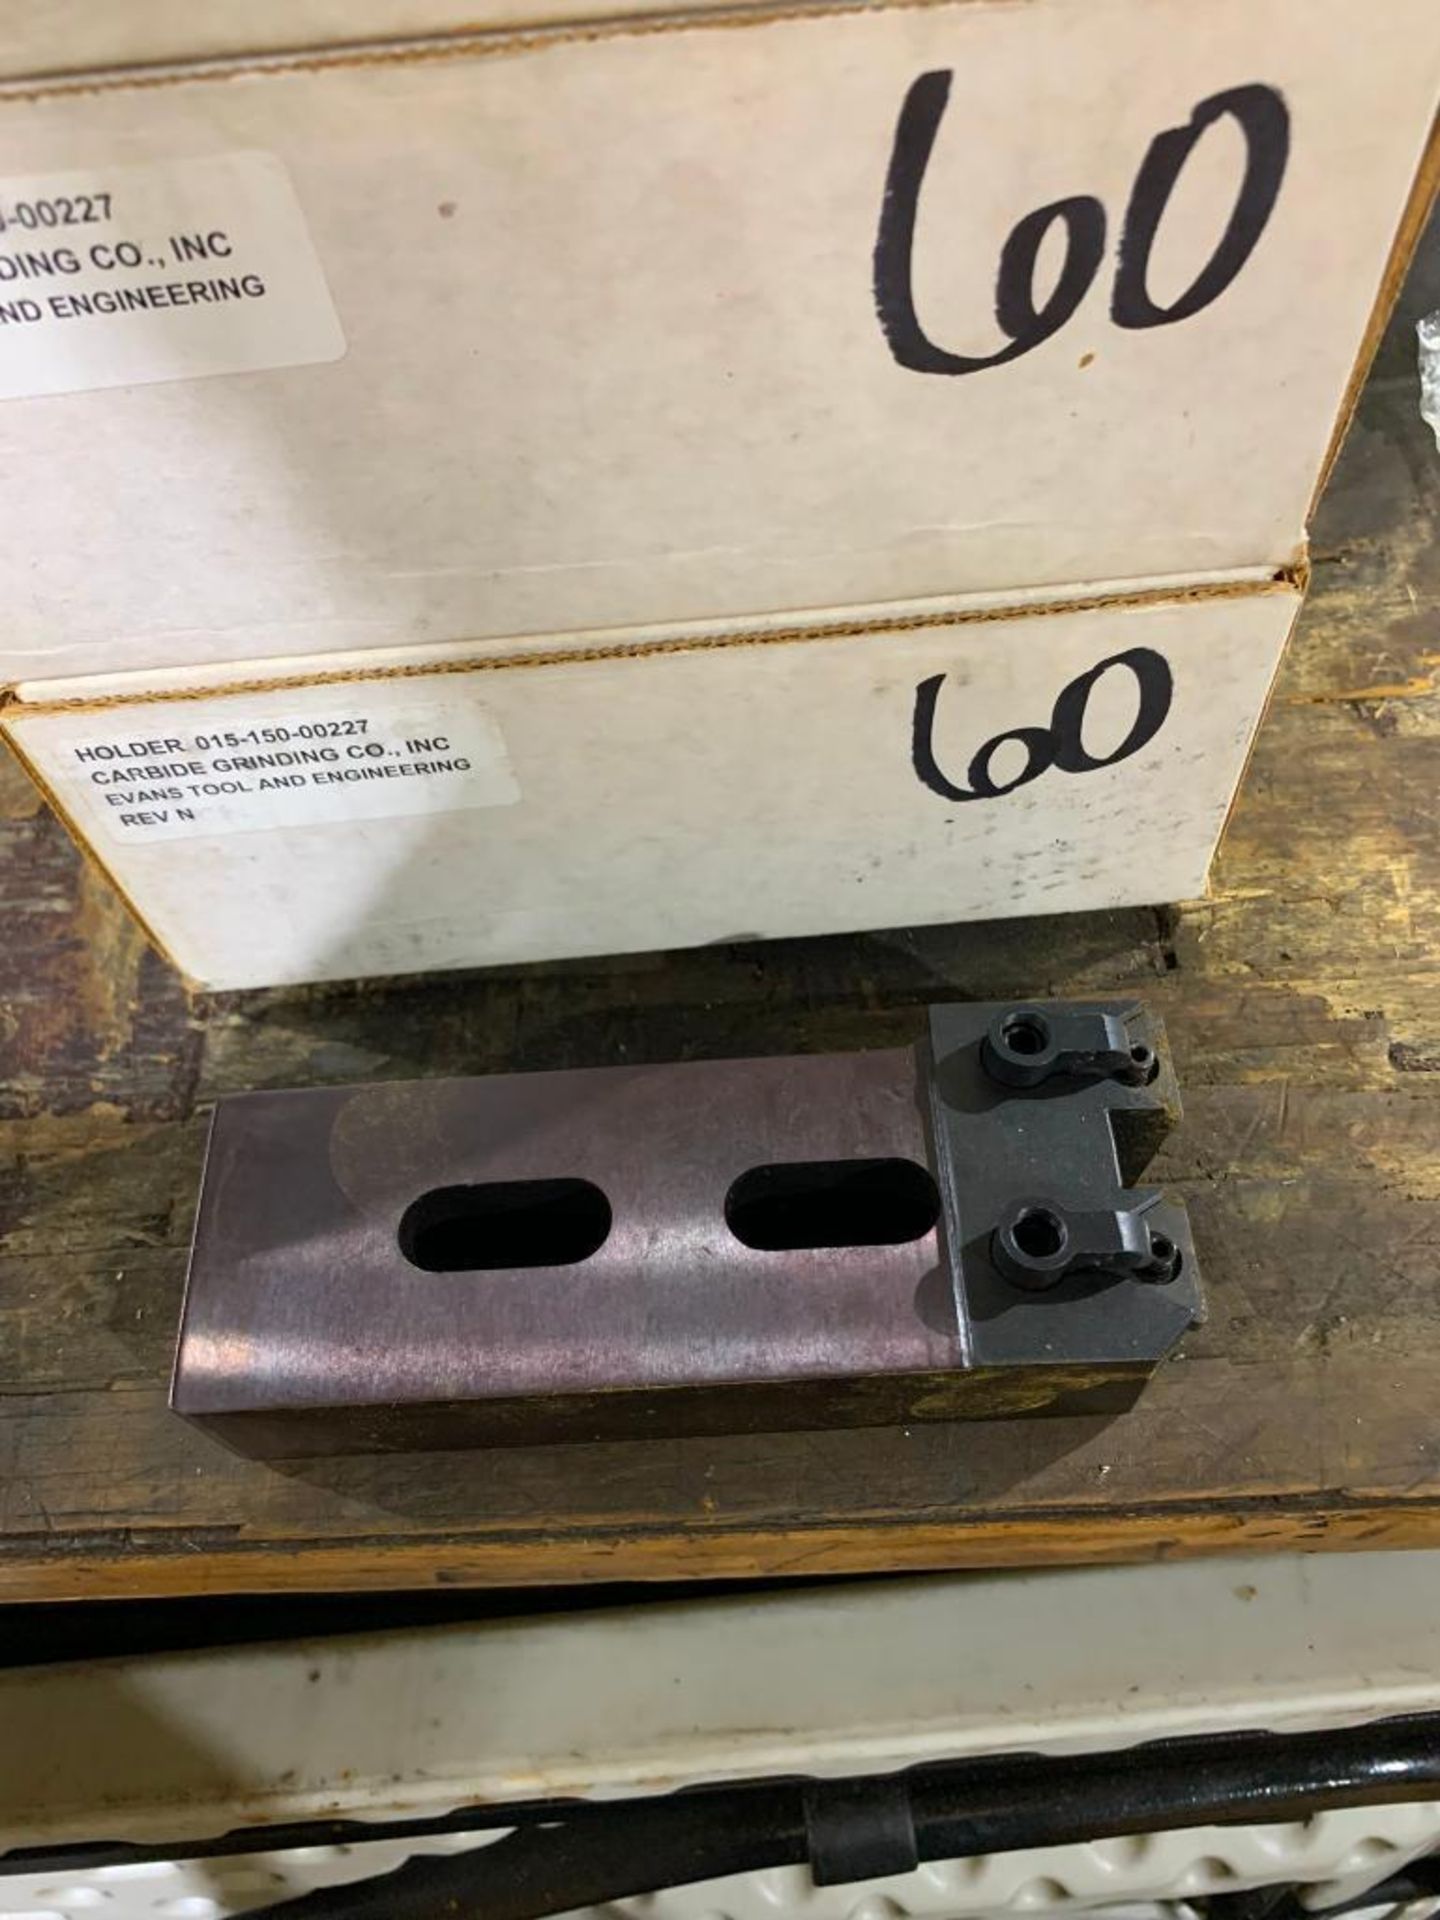 (4) CARBIDE GRINDING CO. TOOL HOLDERS, NO. 015-150-00227